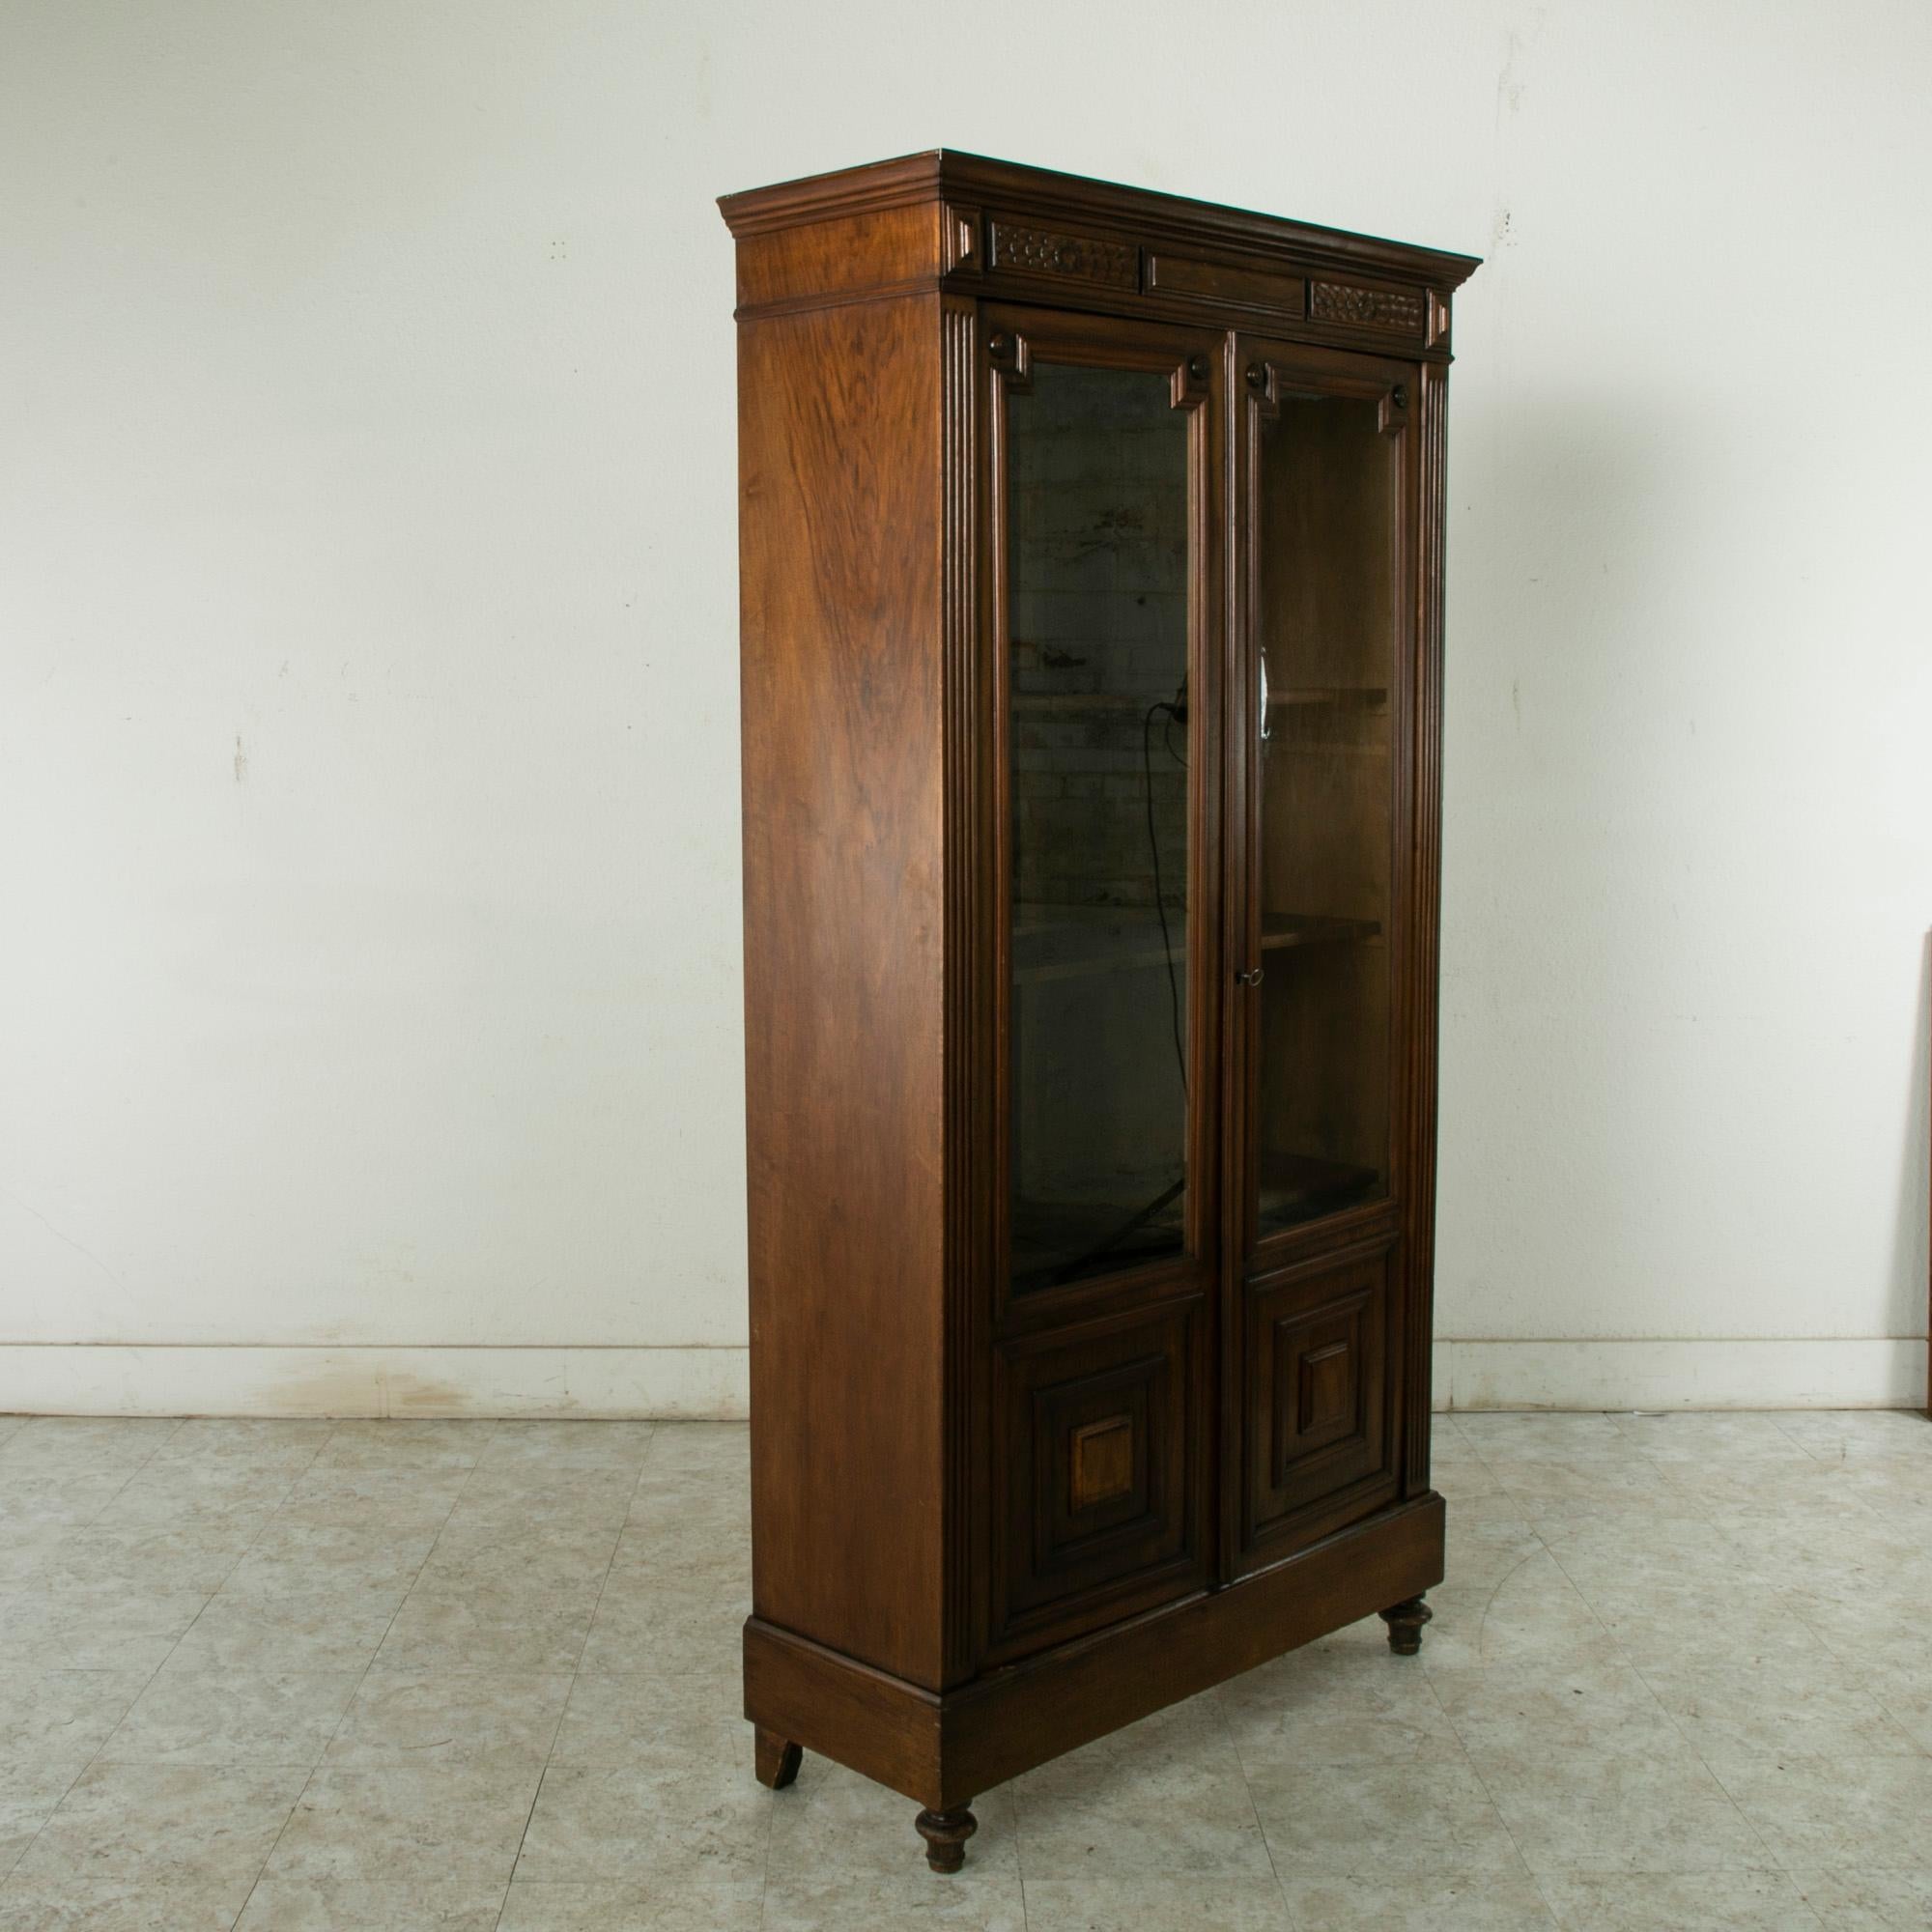 This small scale late nineteenth century Henri II walnut bibliotheque or bookcase rests on finial feet and features fluted columns flanking its glass doors. A simple diamond carving adorns the corners of its upper transom, and panels with rosettes